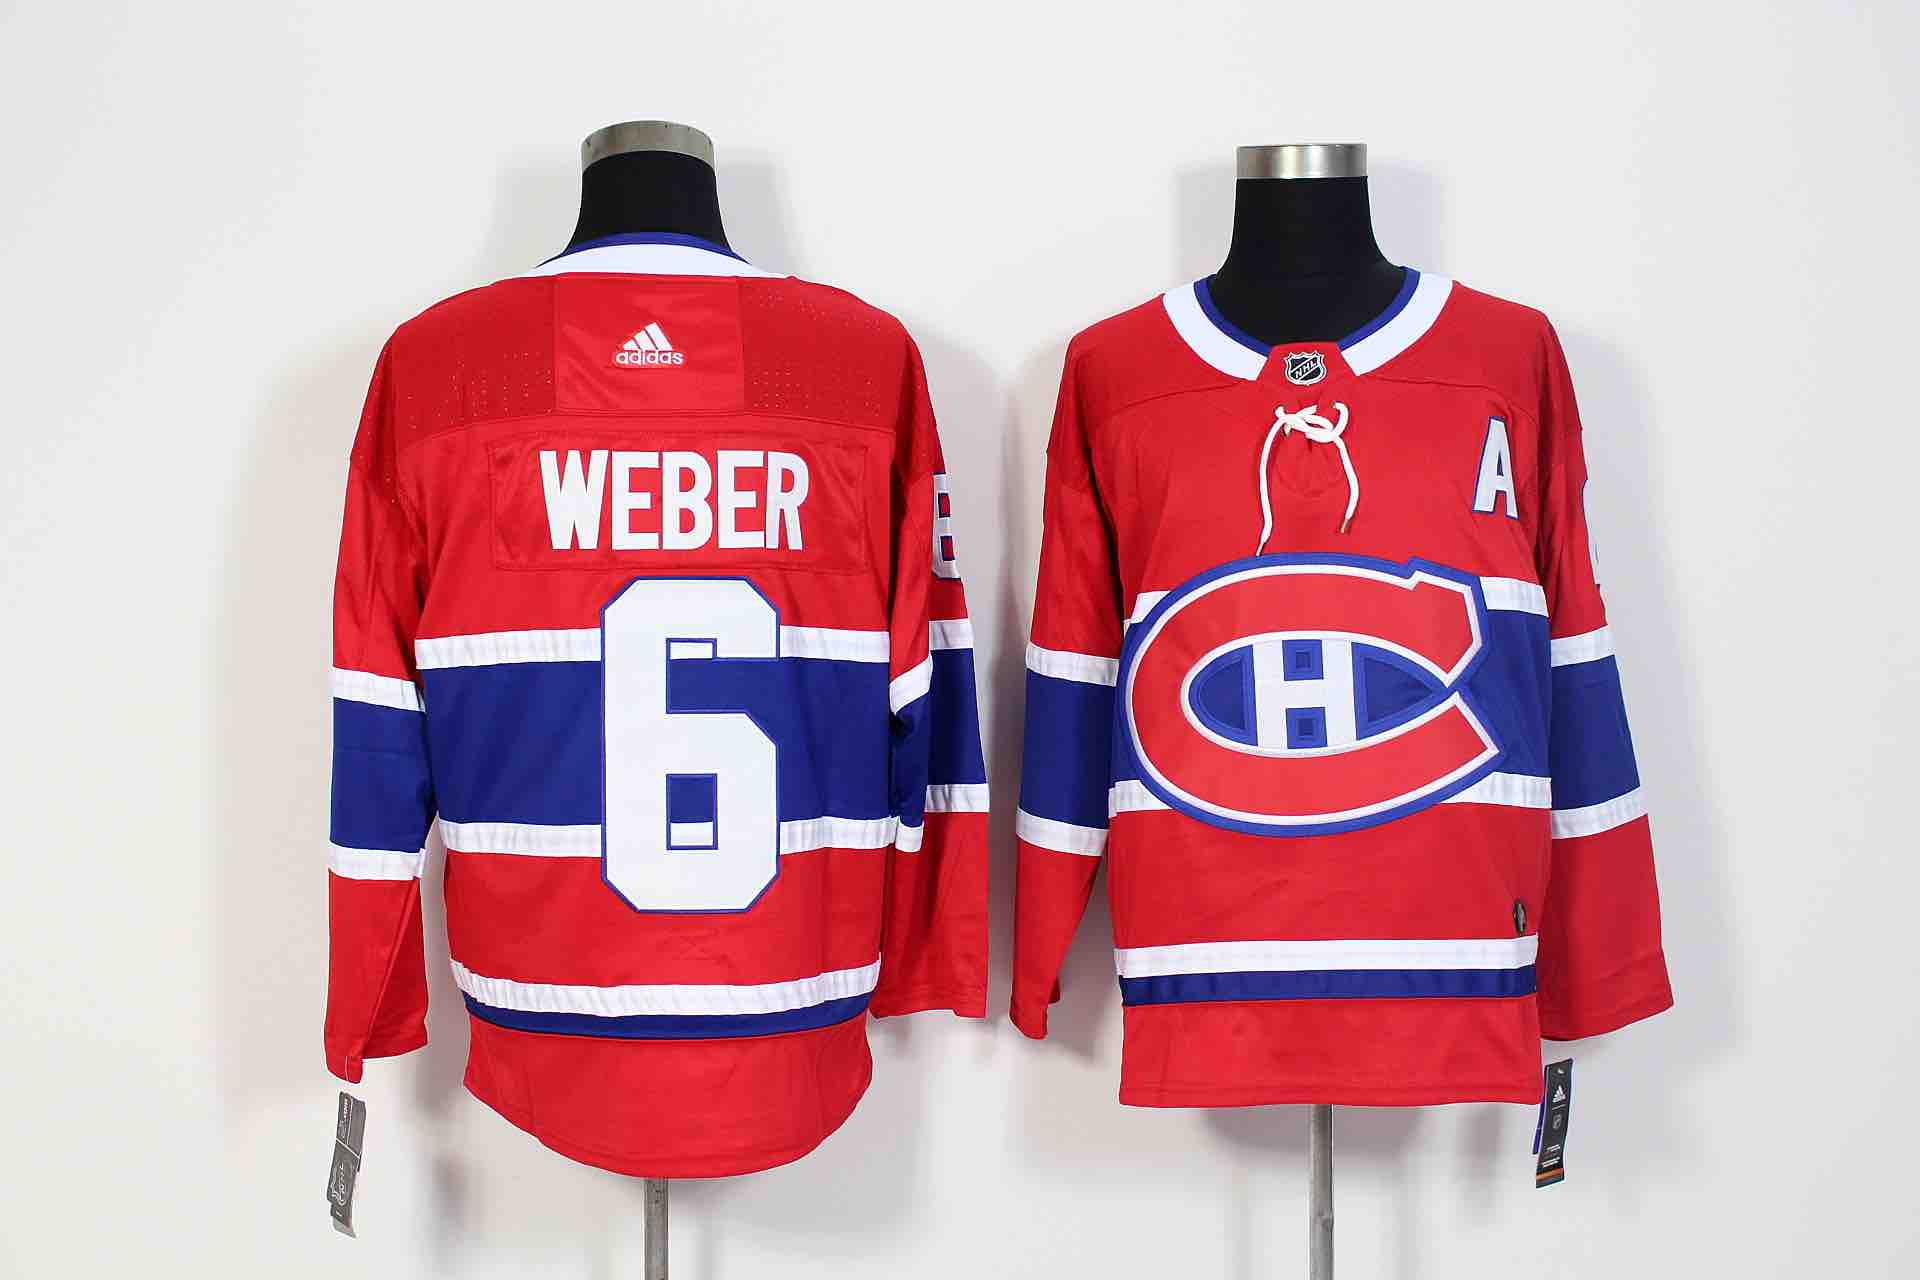 Adidas NHL Montreal Canadiens #6 Weber Red Jersey